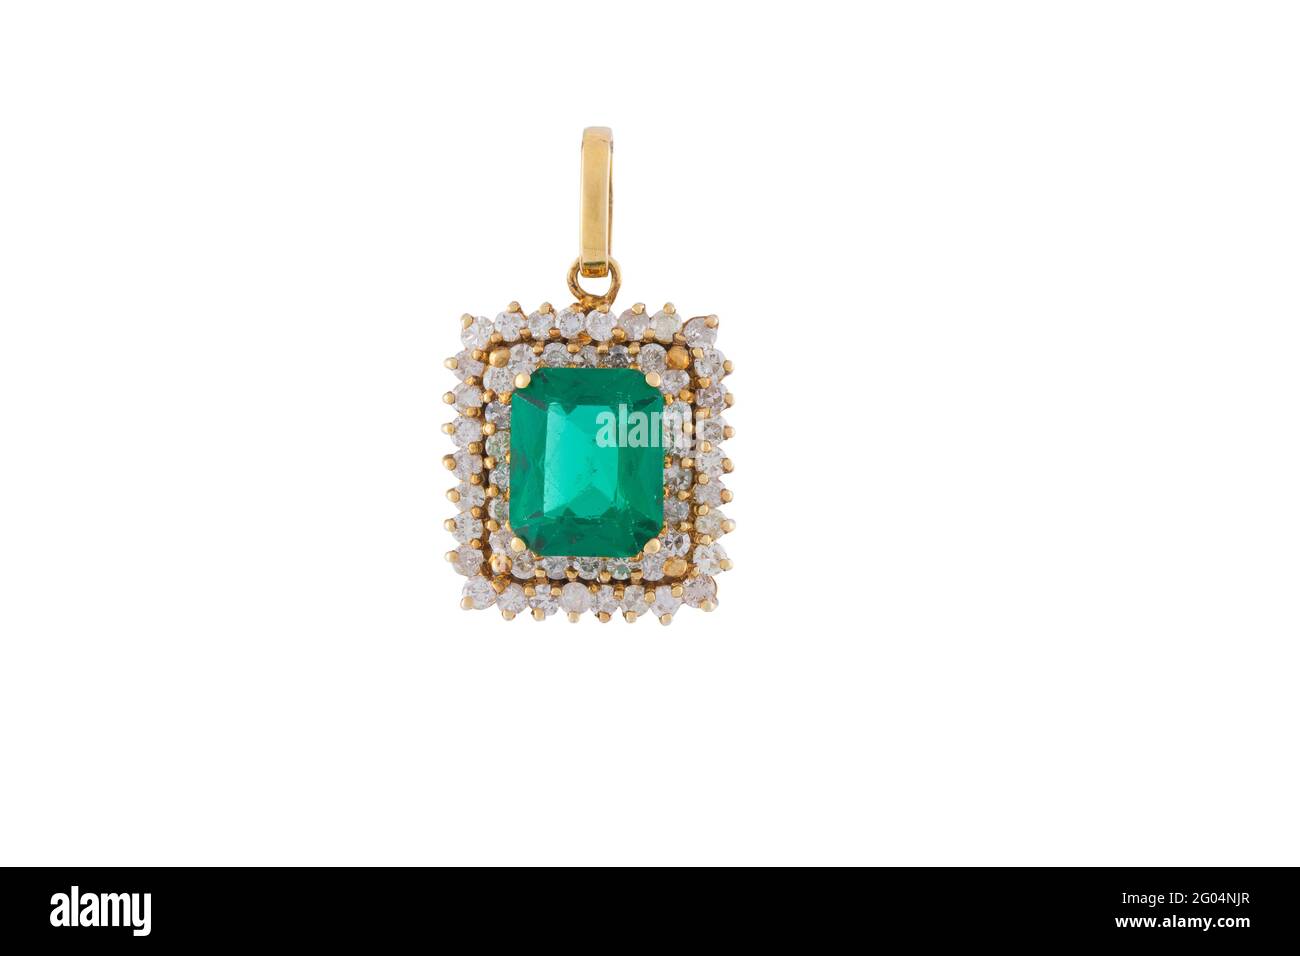 Golden earring with a large emerald set in the middle and small diamonds around it Stock Photo